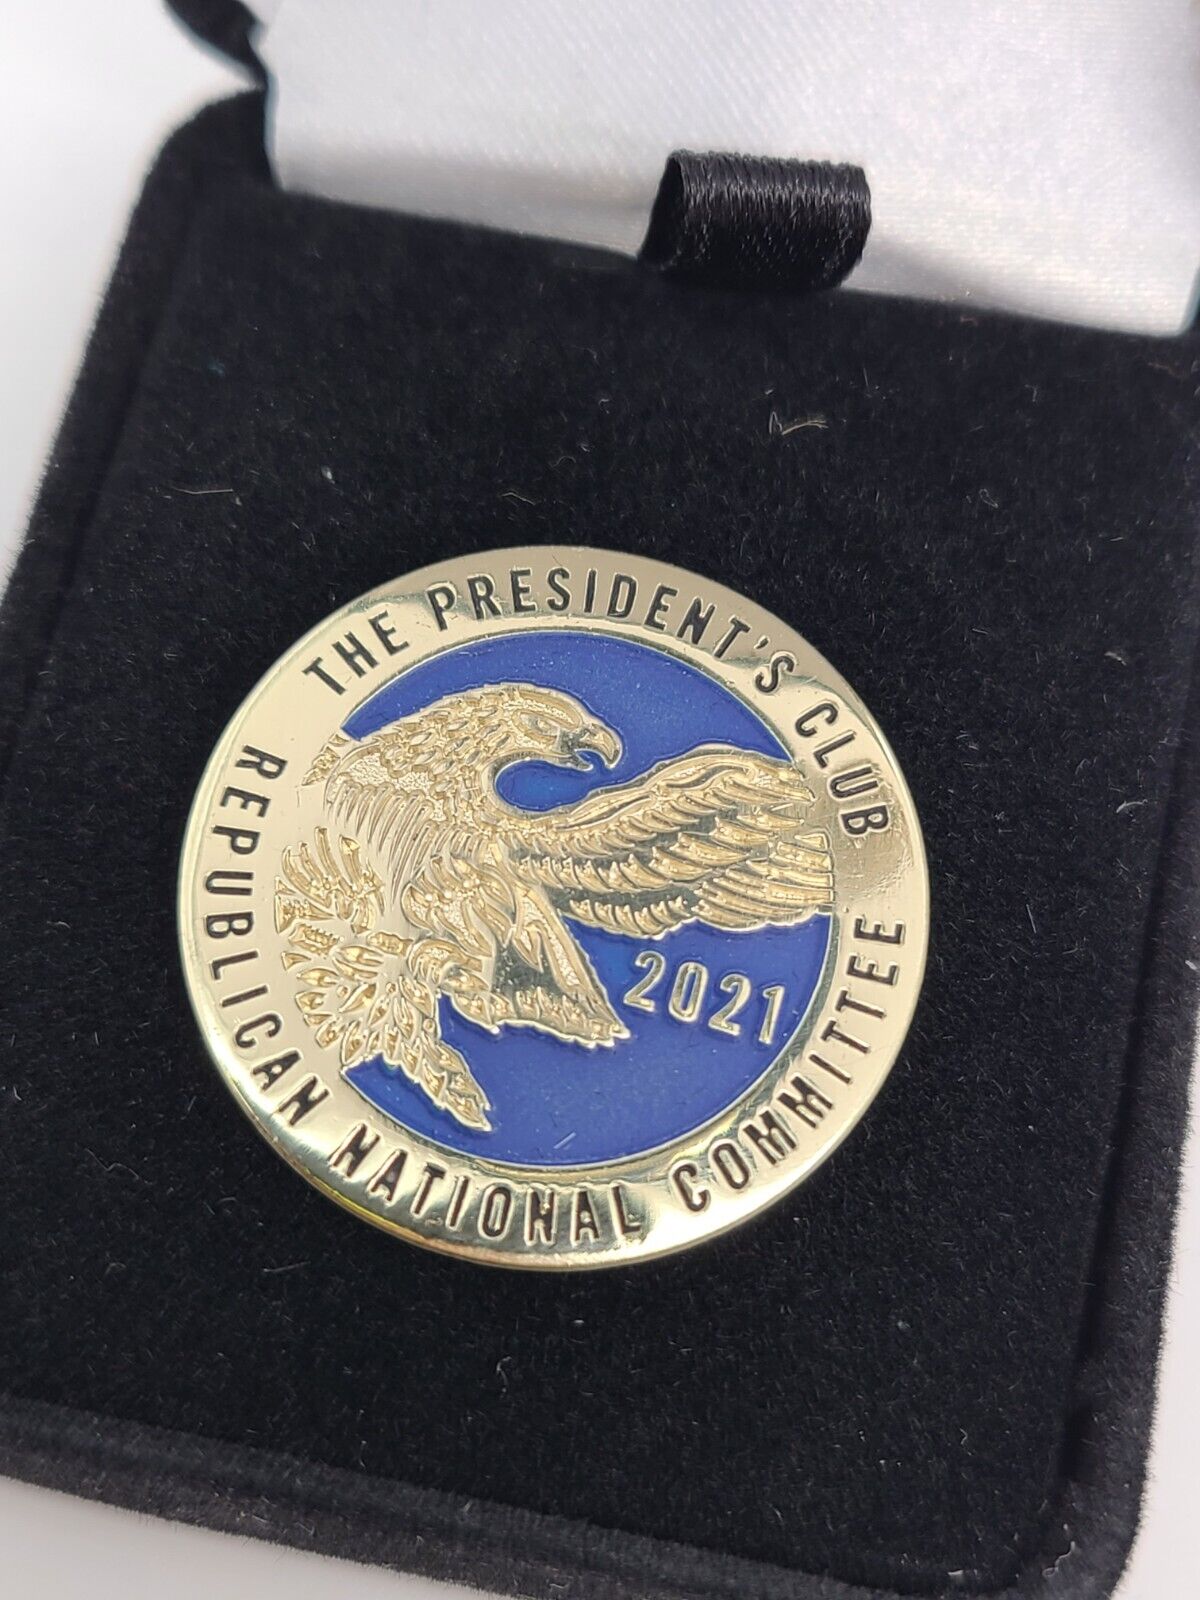 RNC Republican National Committee 2021 The President\'s Club Pin Lapel